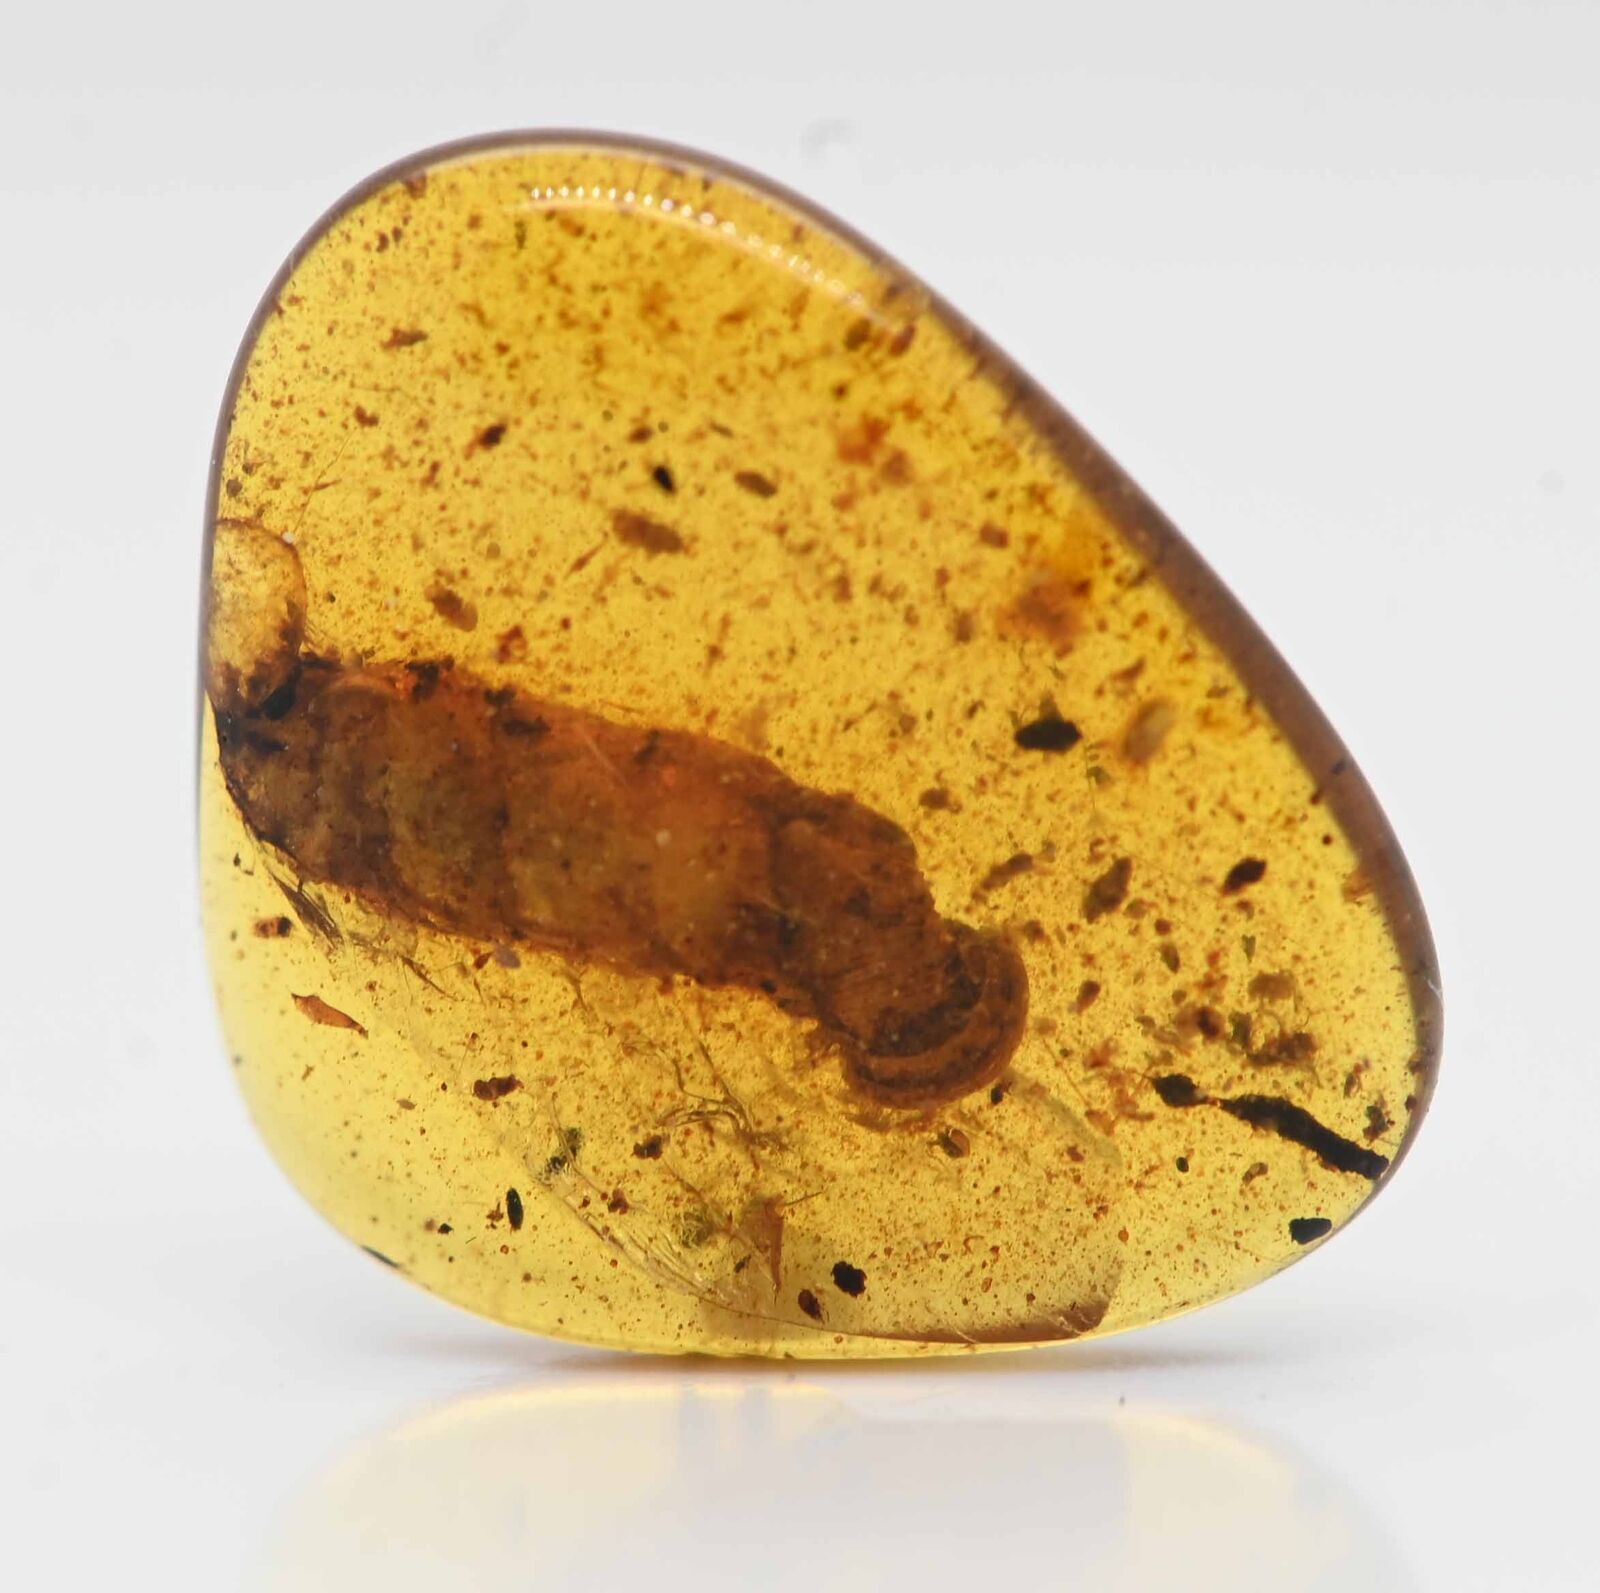 Rare Species of Snail (Gastropoda), Fossil Inclusion in Burmese Amber